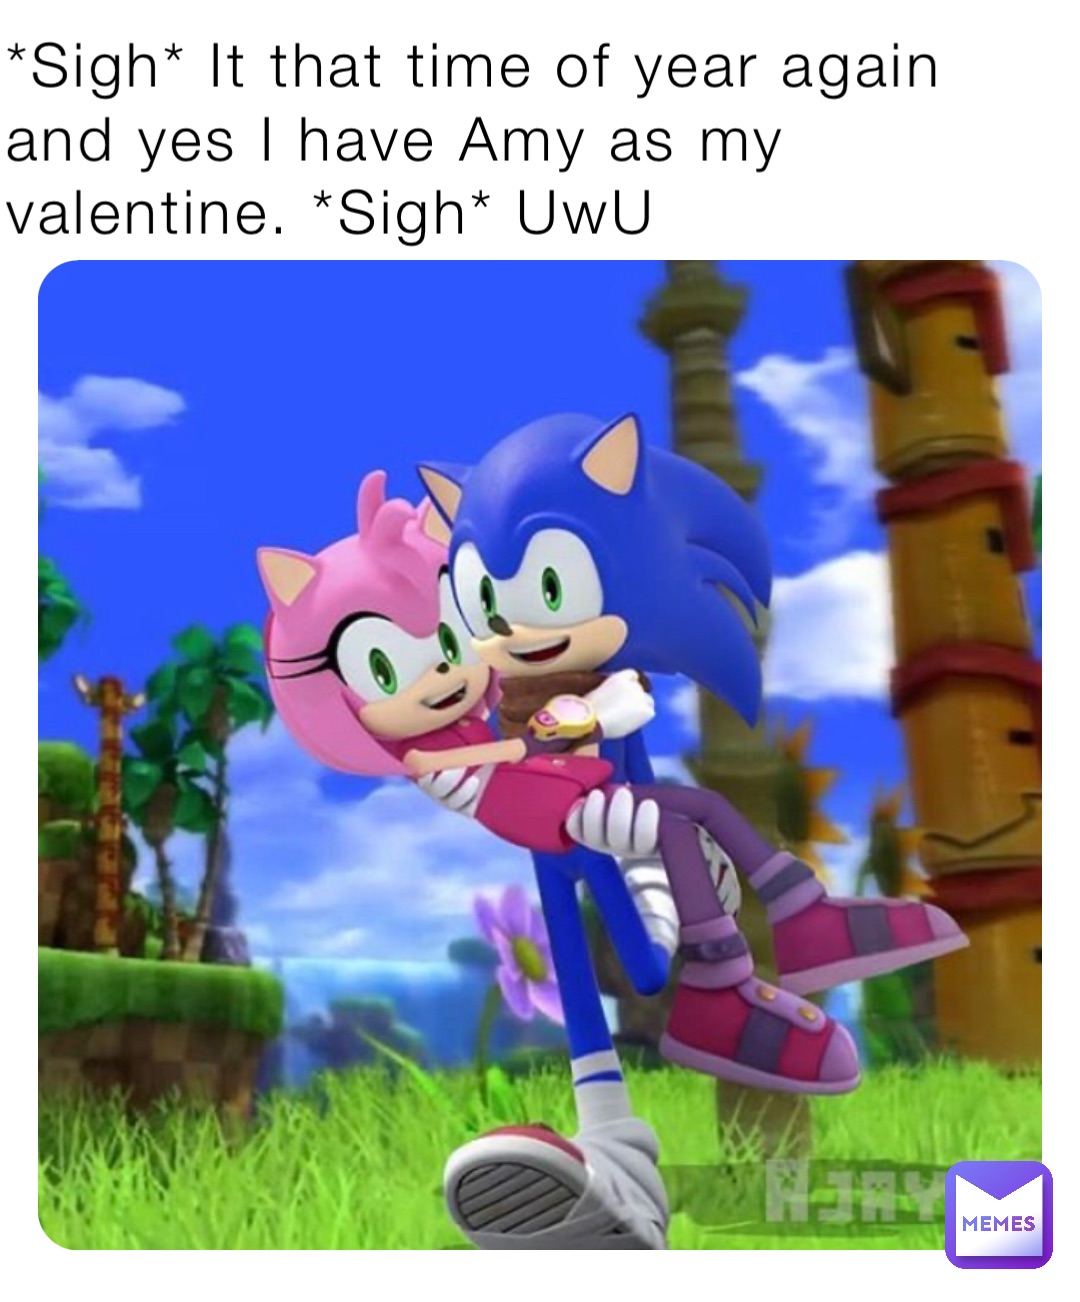 *Sigh* It that time of year again and yes I have Amy as my valentine. *Sigh* UwU